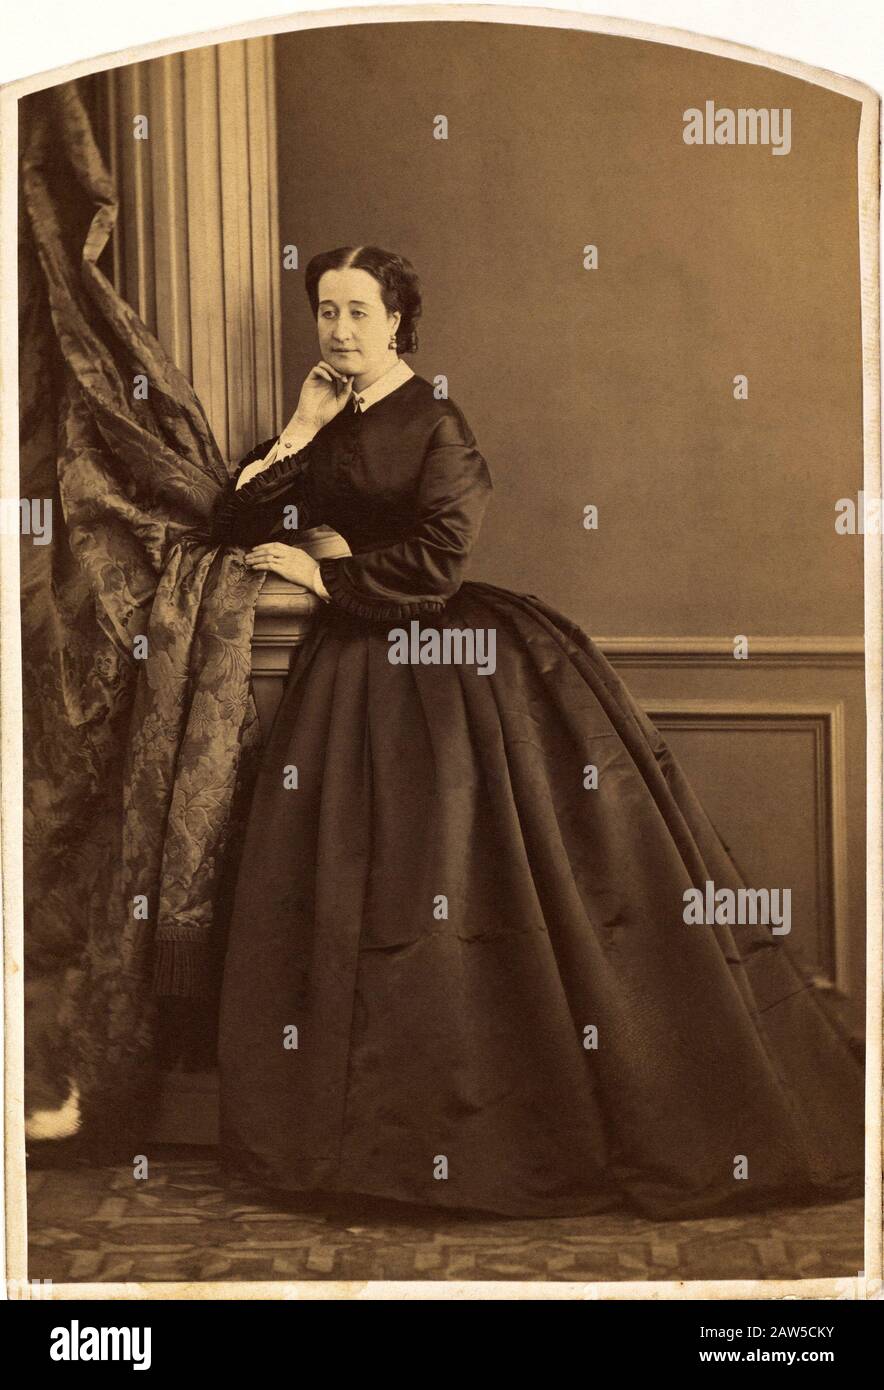 1861 ca, FRANCE : The french Empress EUGENIE de Montijo ( 1826 - 1920)  married with Napoleon III BONAPARTE ( 1808 - 1873 ) . Photo by Count OLYMPE  AGU Stock Photo - Alamy